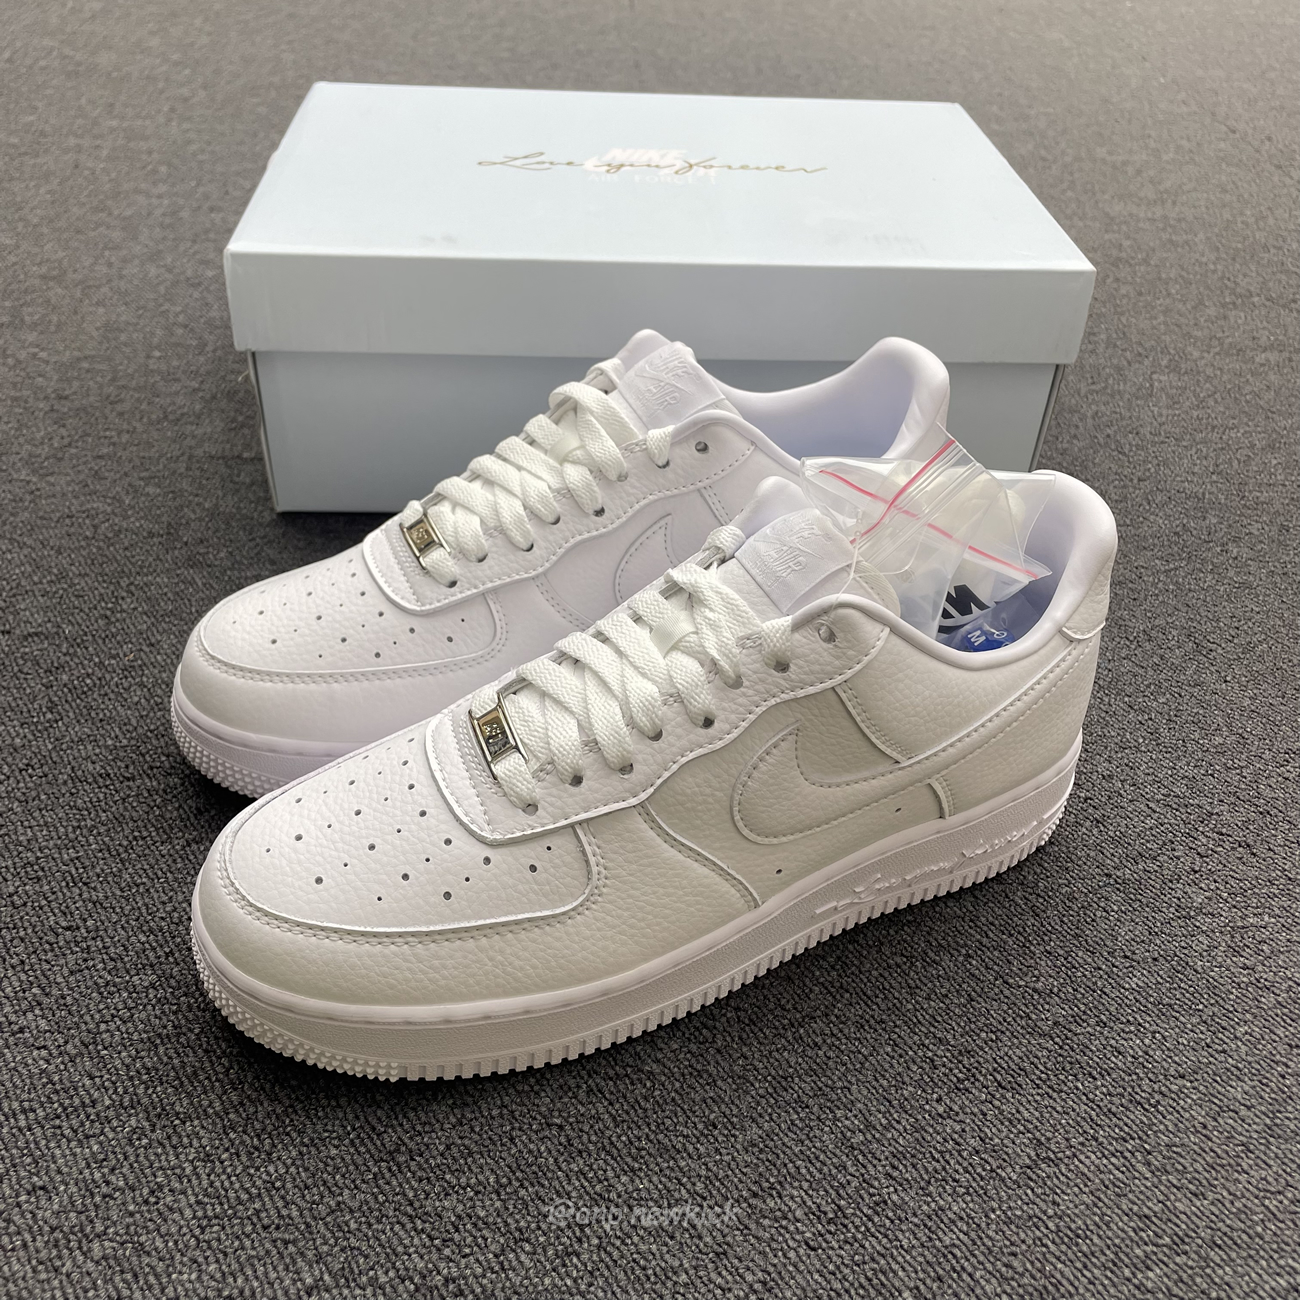 Nike Air Force 1 Low Drake Nocta Certified Lover Boy Cz8065 100 (5) - newkick.org